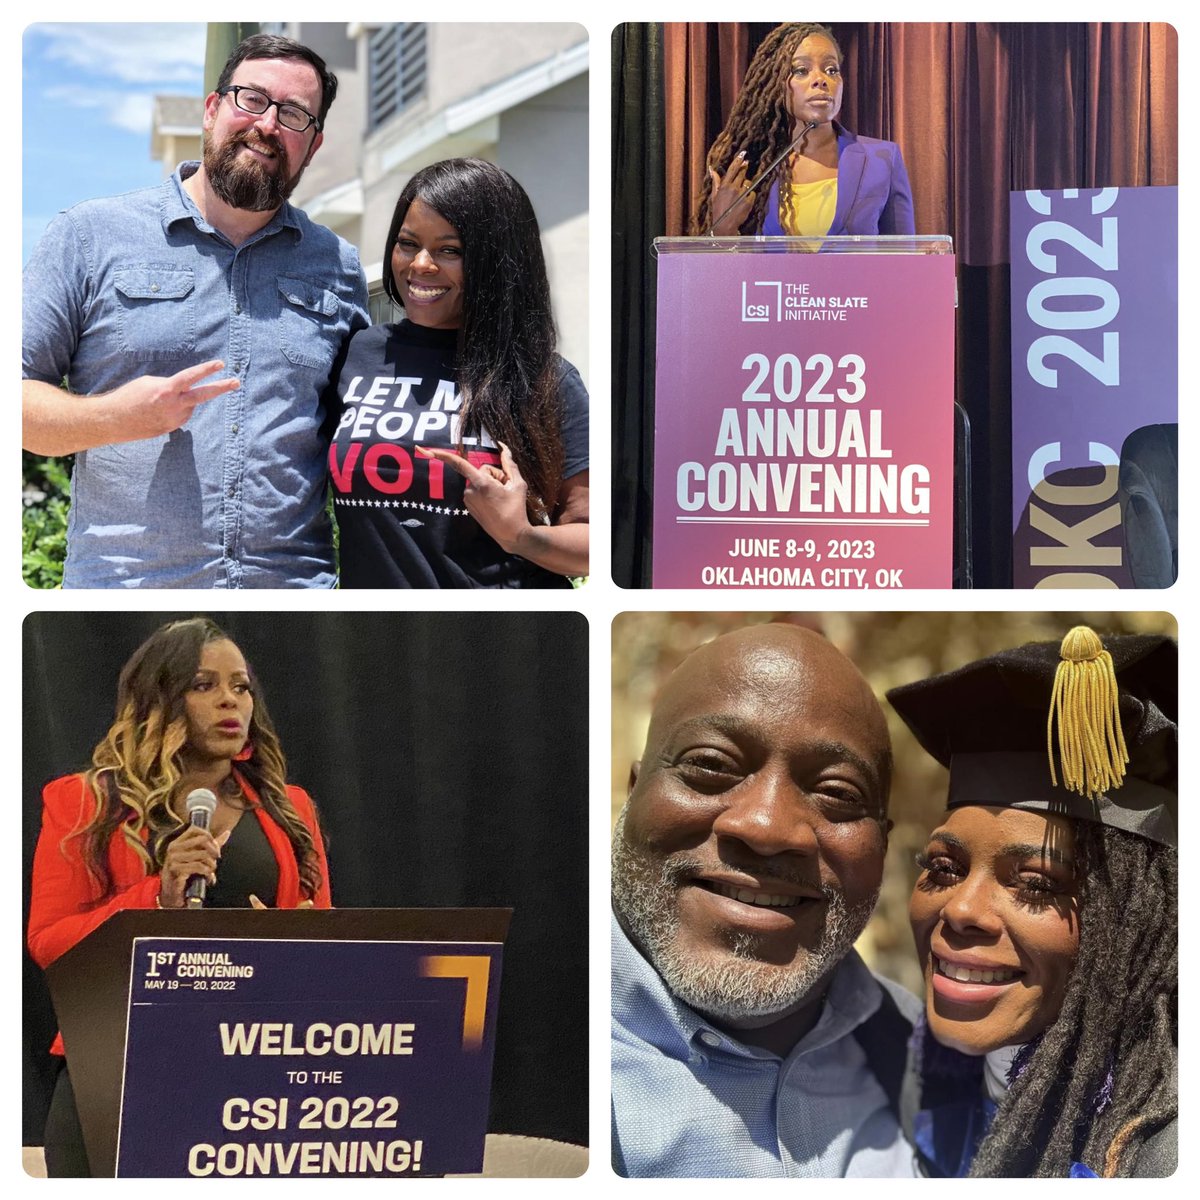 Big shout out to @sheena_meade and @CleanSlate_Init !!! 

Happy 4-year anniversary at Clean Slate, Sheena! Your leadership is impacting so many lives. And the best is yet to come!

@desmondmeade @FLRightsRestore